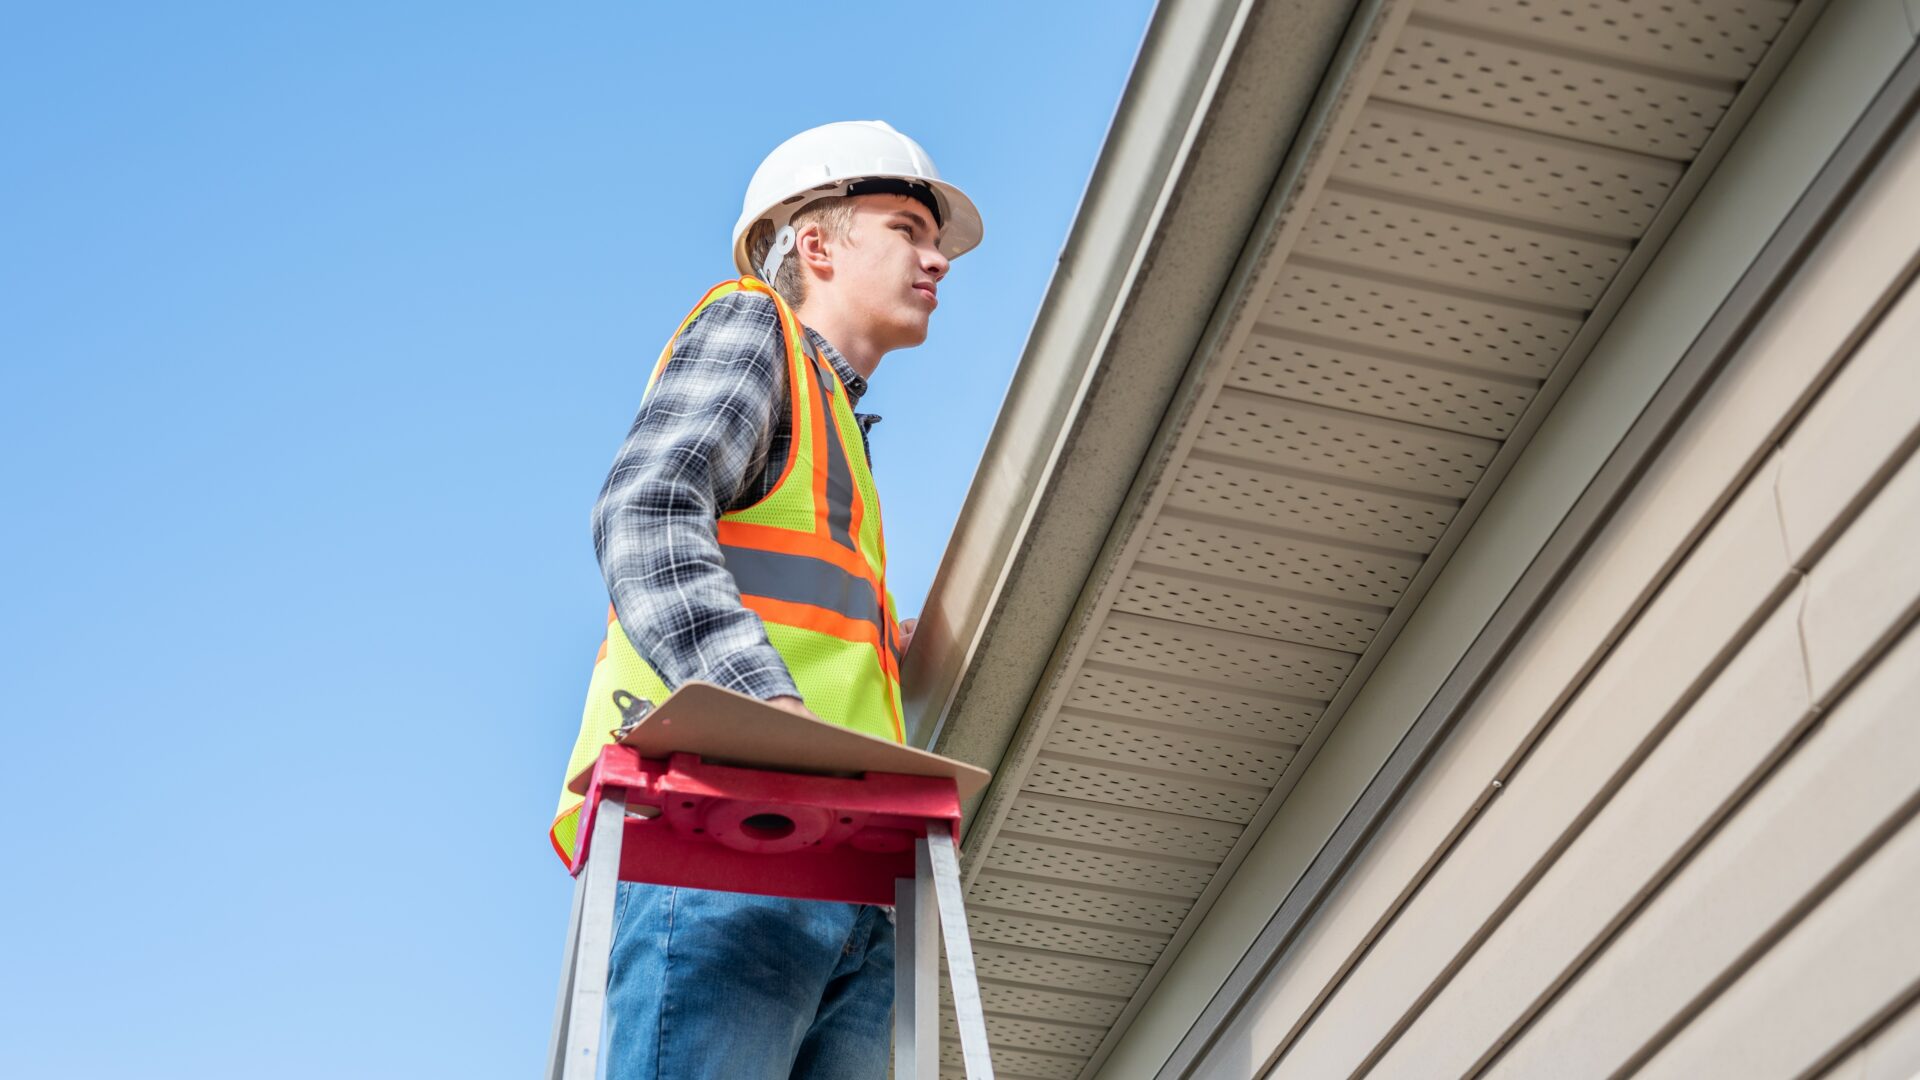 A roofer with a hardhat on inspects the edge of a roof